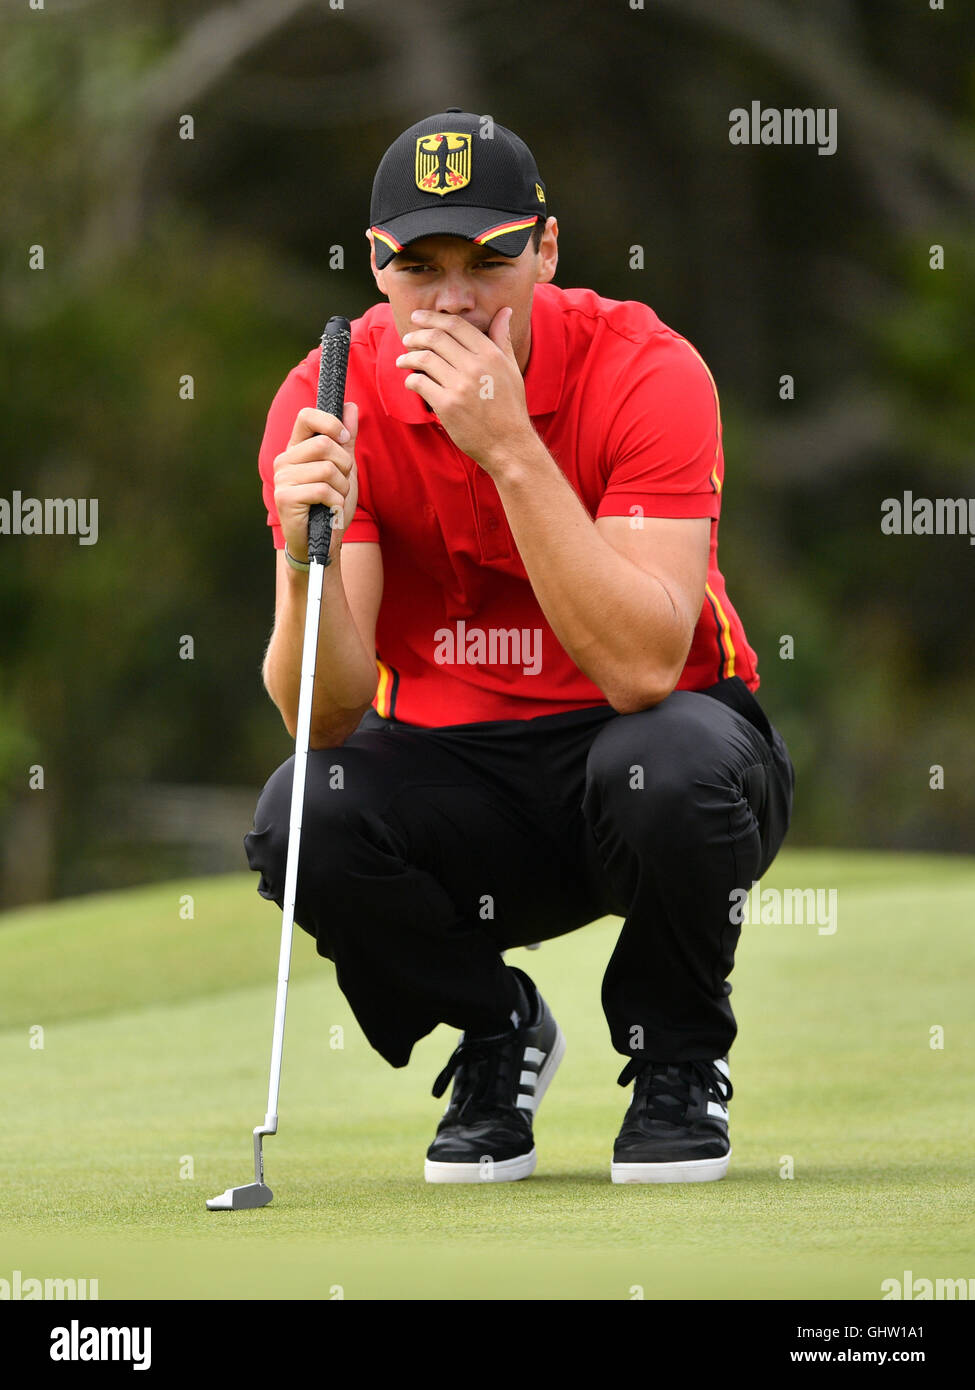 Rio de Janeiro, Brazil. 11th Aug, 2016. Martin Kaymer of Germany is seen during the Men's Individual Stroke Play Round 1 of the Golf events during the Olympic Games at the Olympic Golf Course in Rio de Janeiro, Brazil, 11 August 2016. Photo: Lukas Schulze/dpa/Alamy Live News Stock Photo